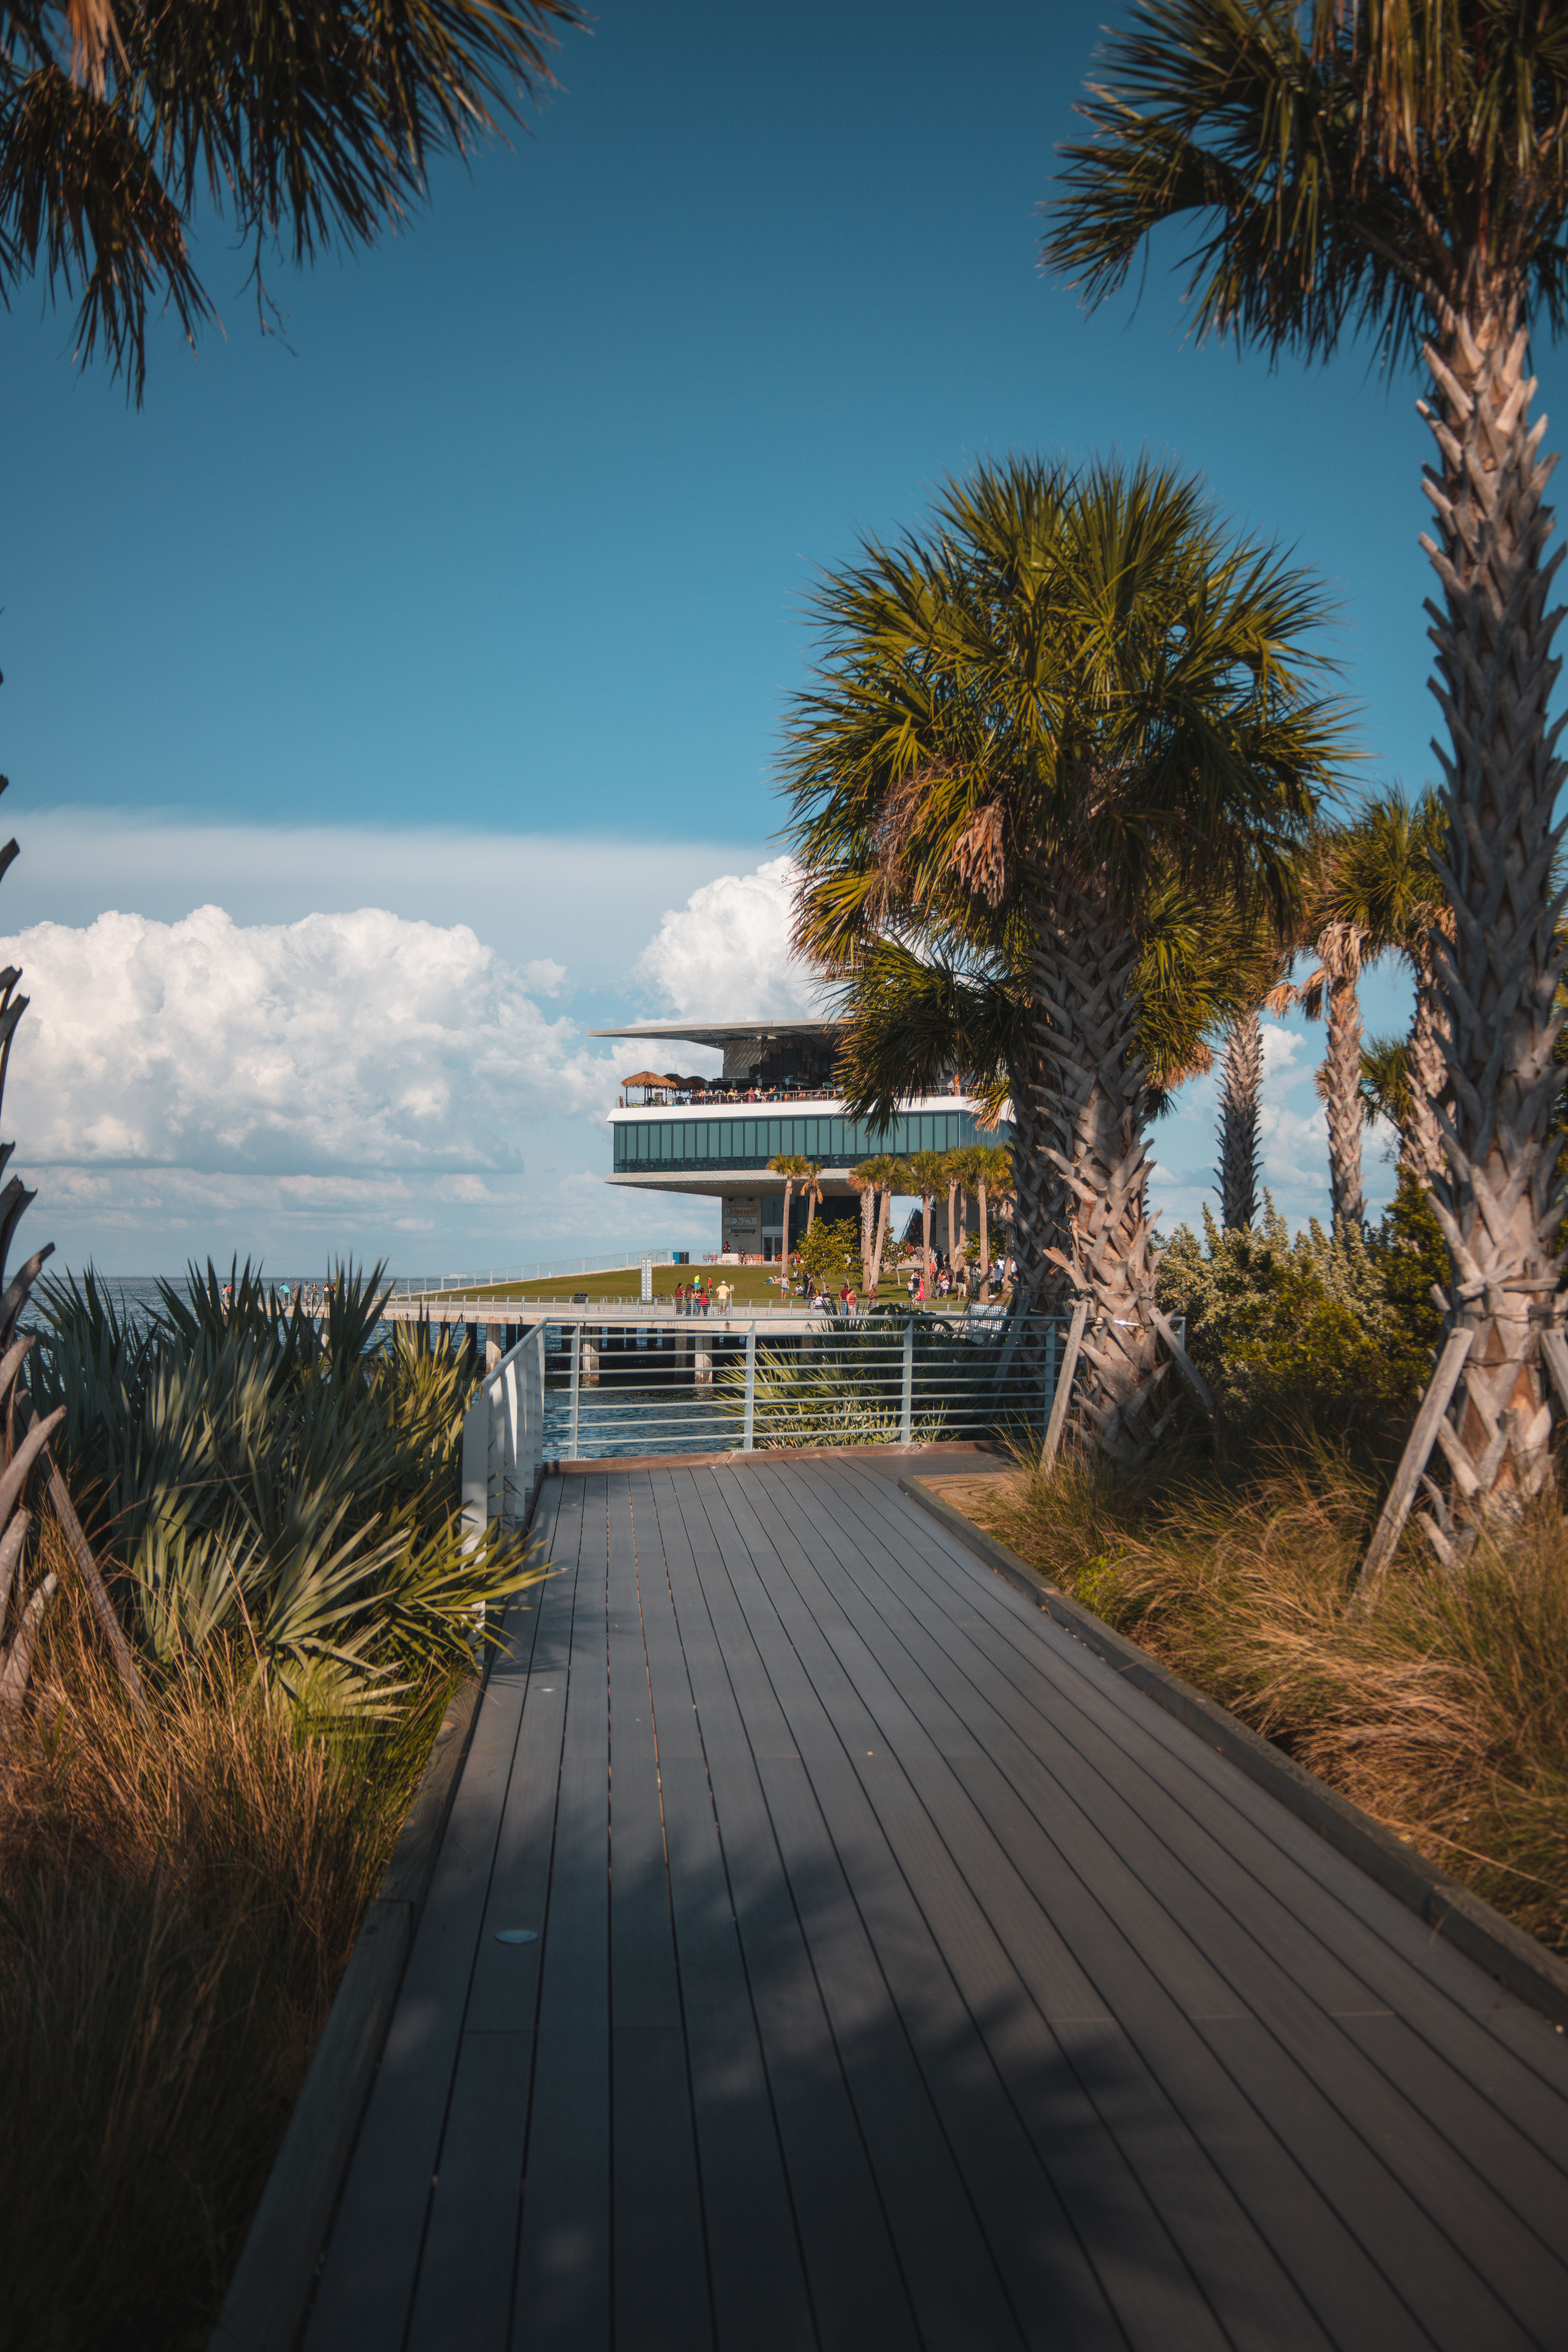 Trees and grasses at the sides of St. Pete Pier with the backdrop of a blue sky, St Peterburg, Florida, USA